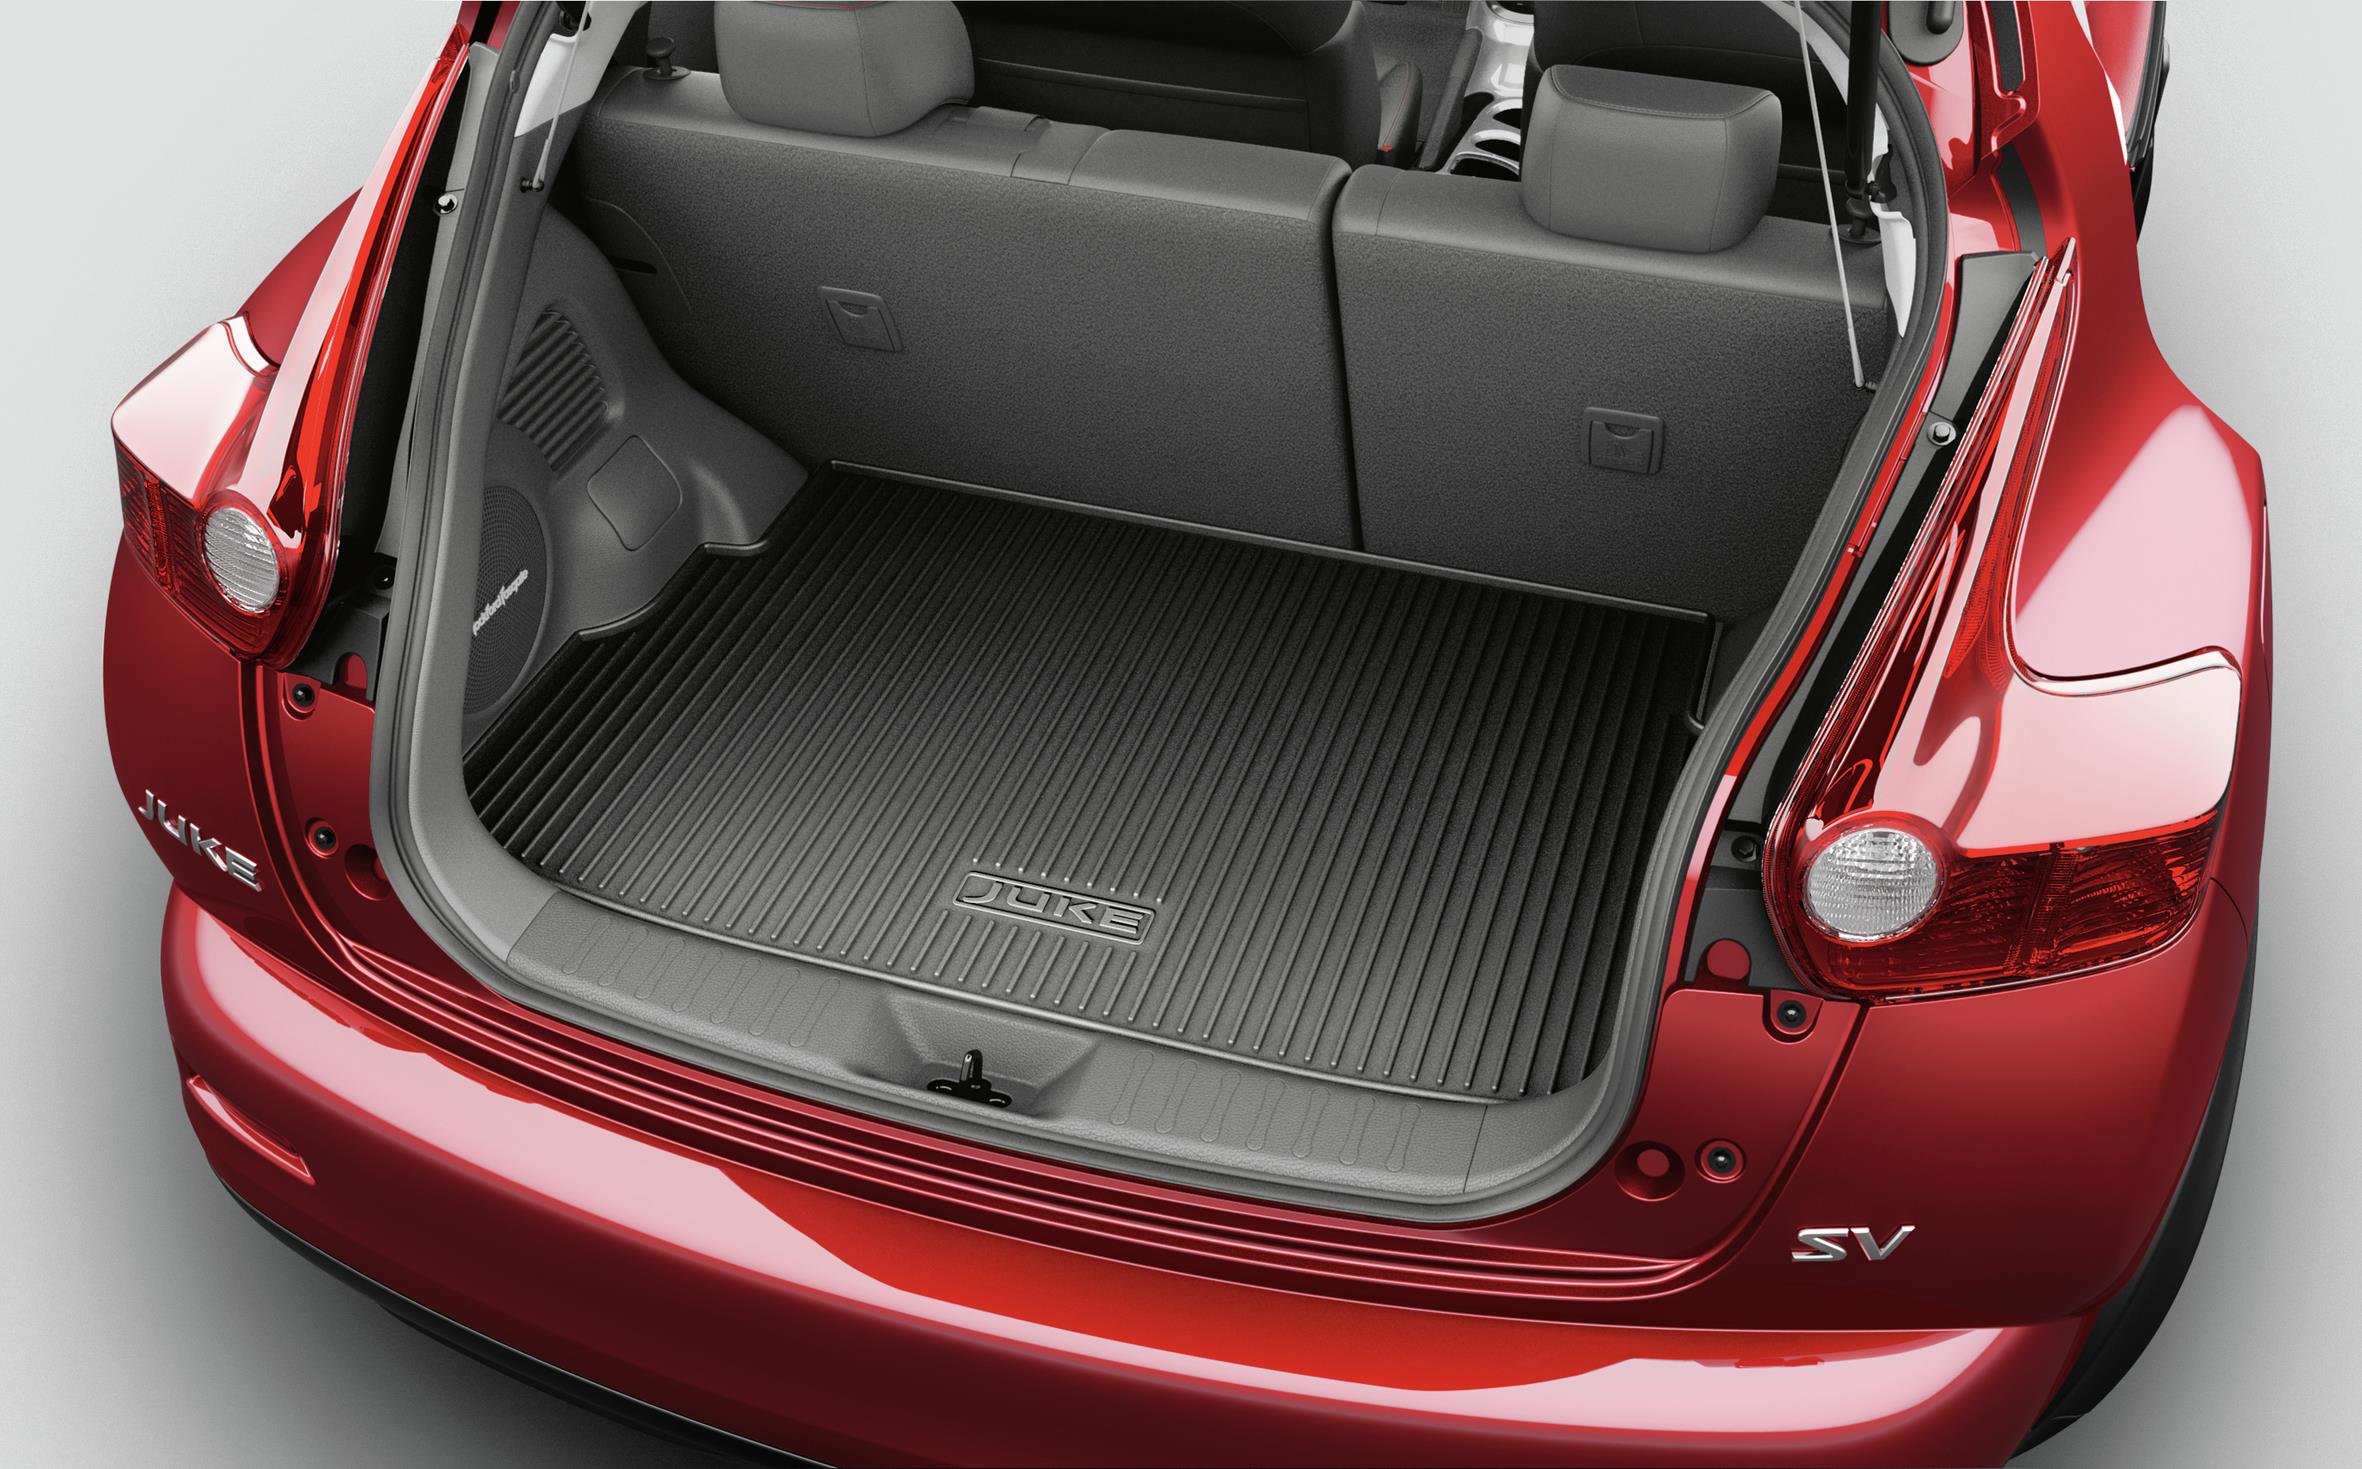 Nissan Juke Cargo Area Protector With Subwoofer. All with subwoofer -  999C3-6X000 - Genuine Nissan Accessory